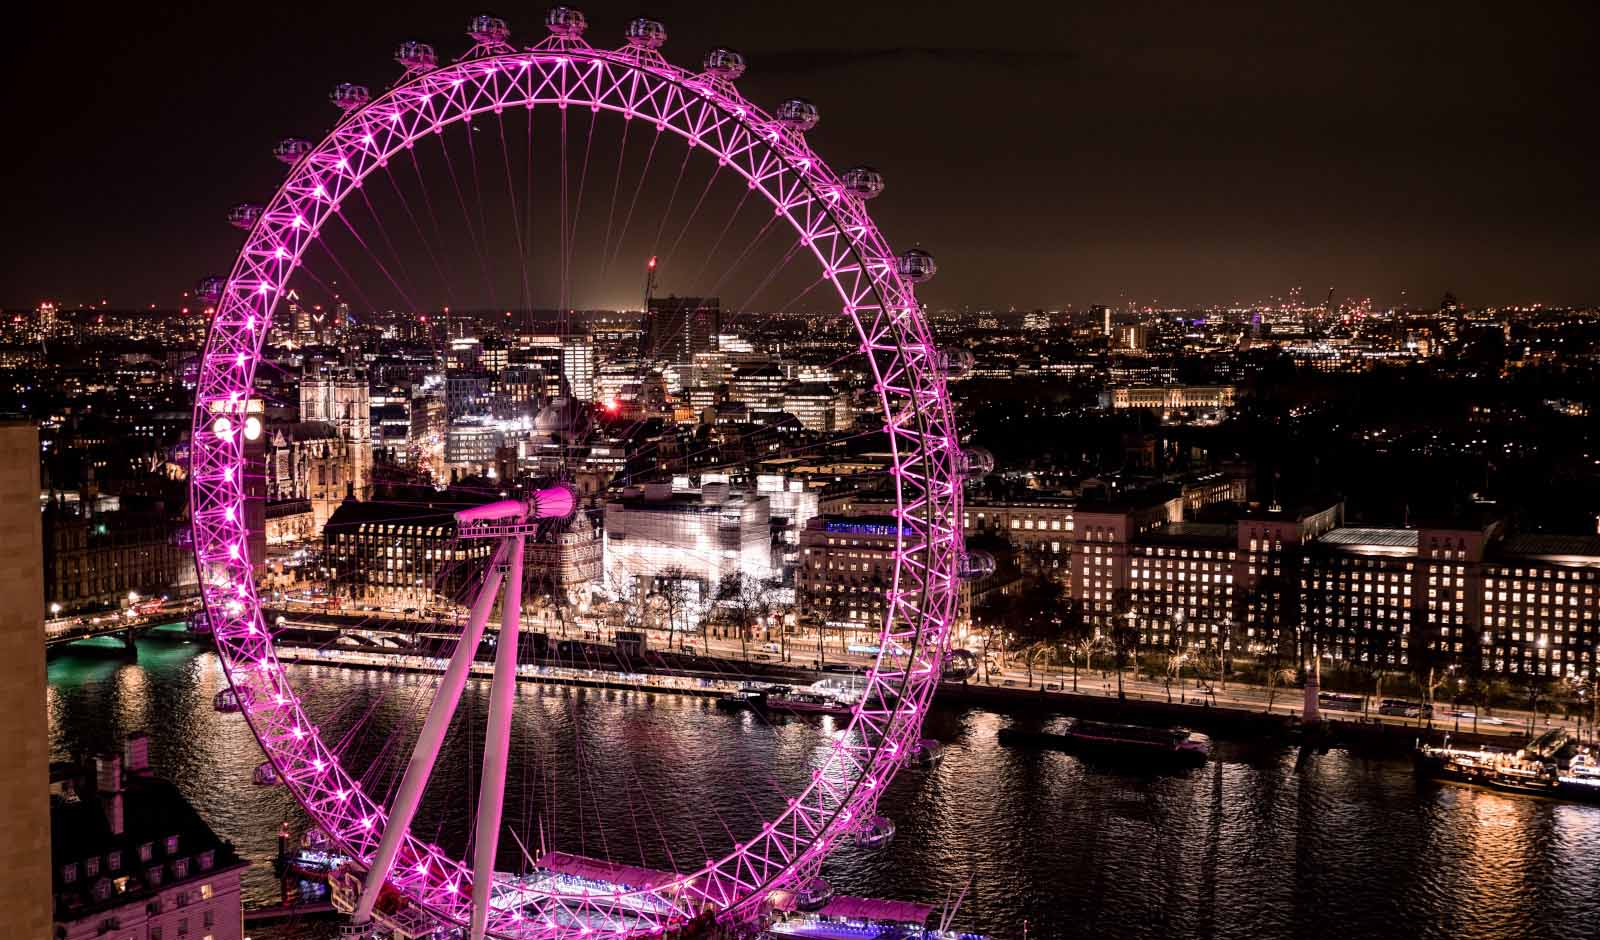 Sunday Savers: Get 40% Off Sunday Bookings at The London Eye